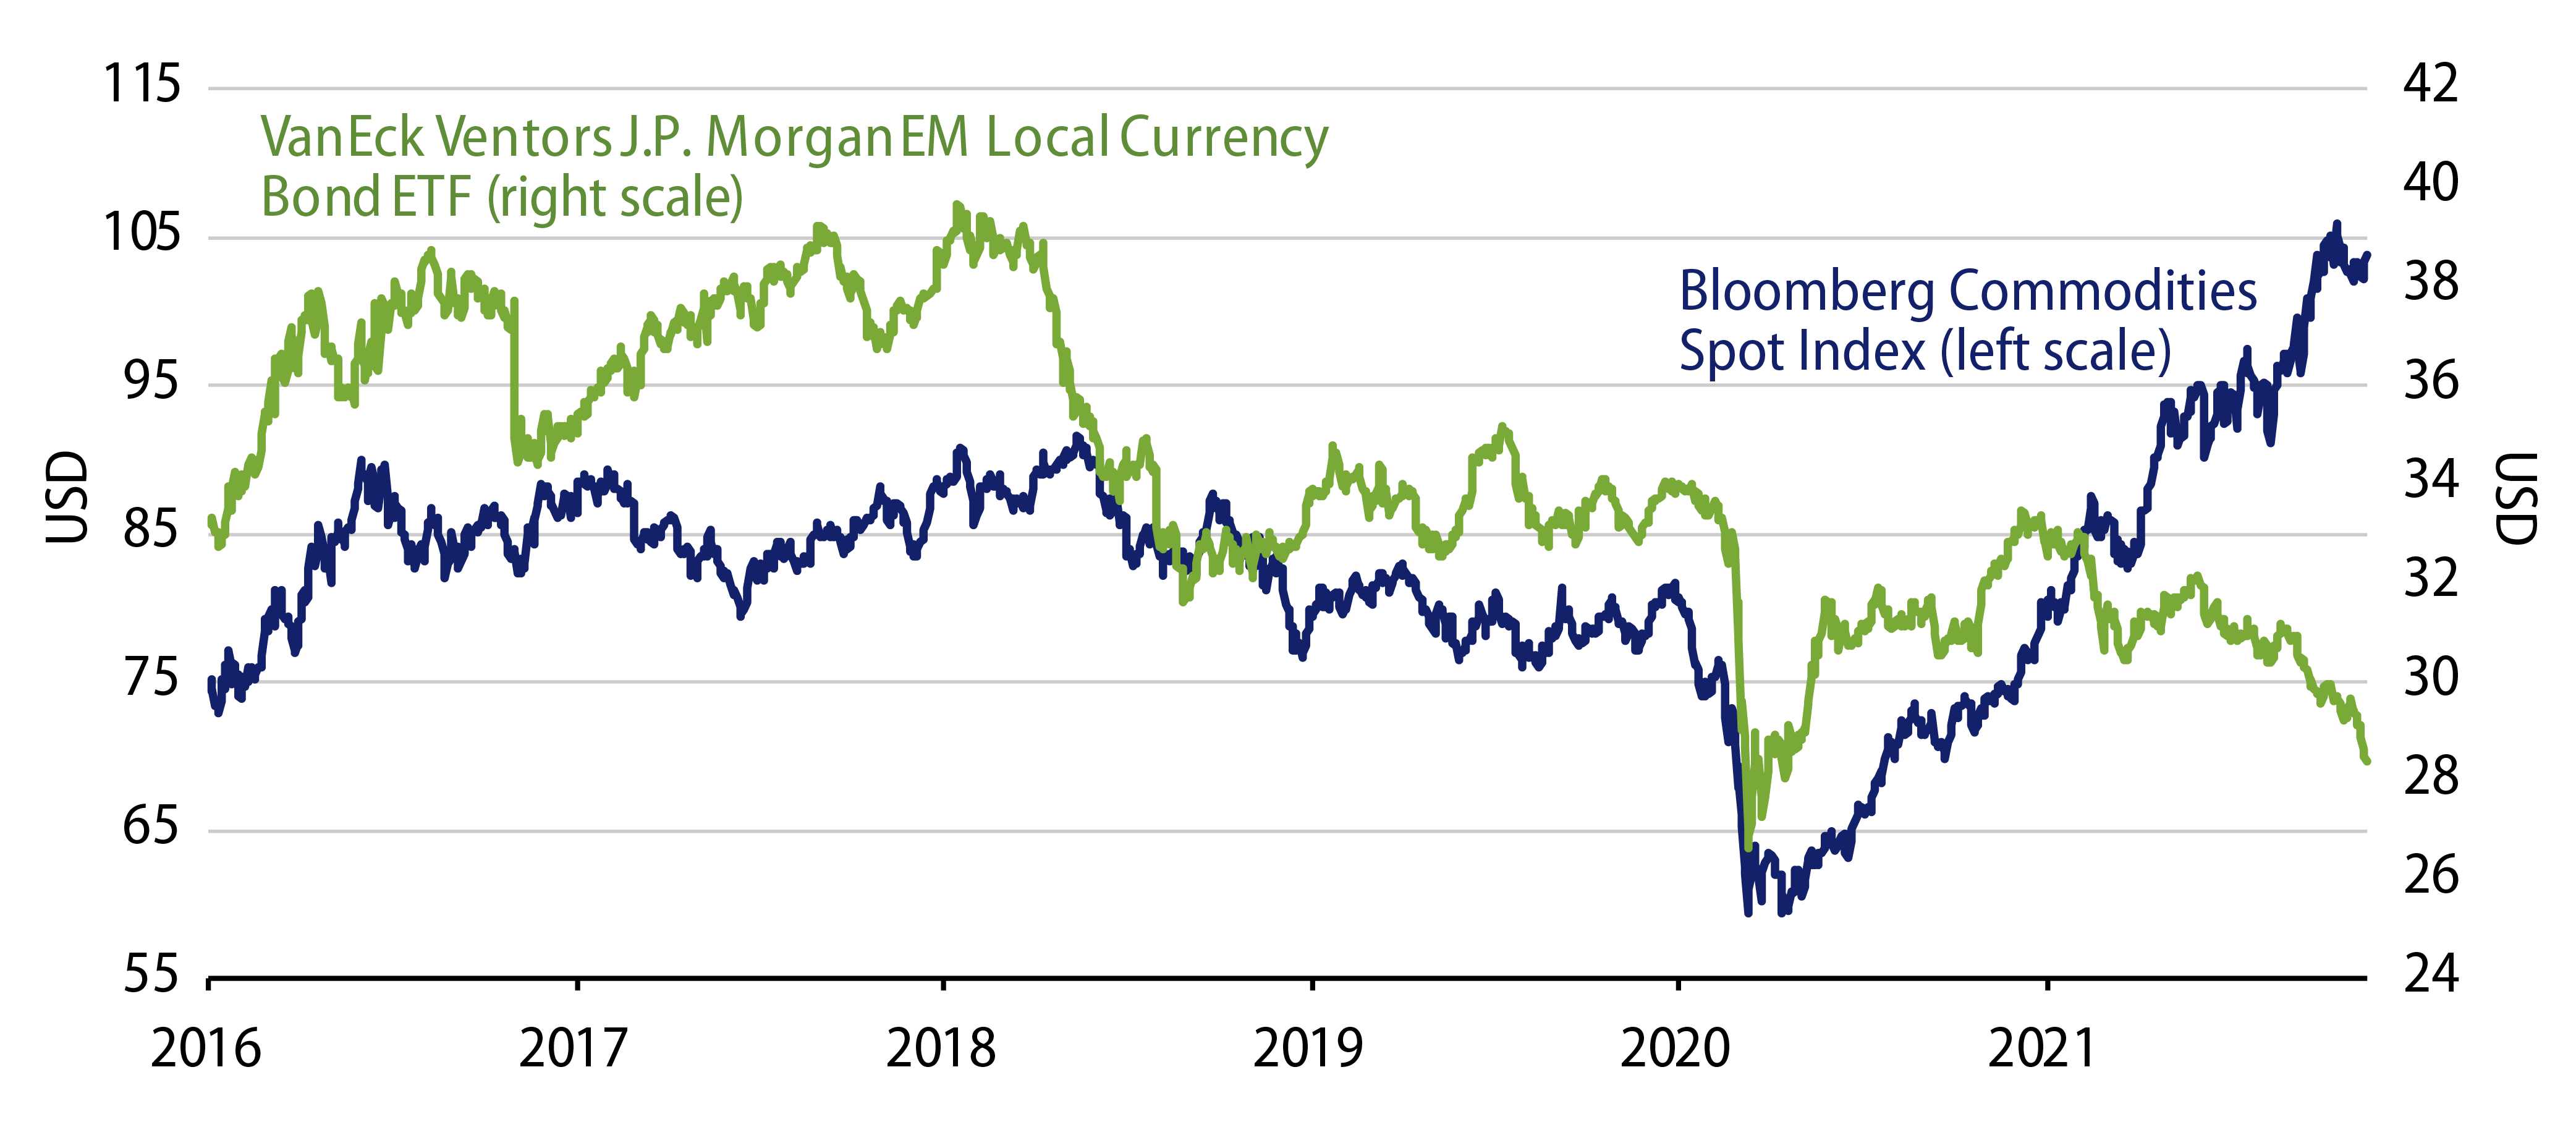 Emerging Markets Local Currency vs. Commodities Spot Index